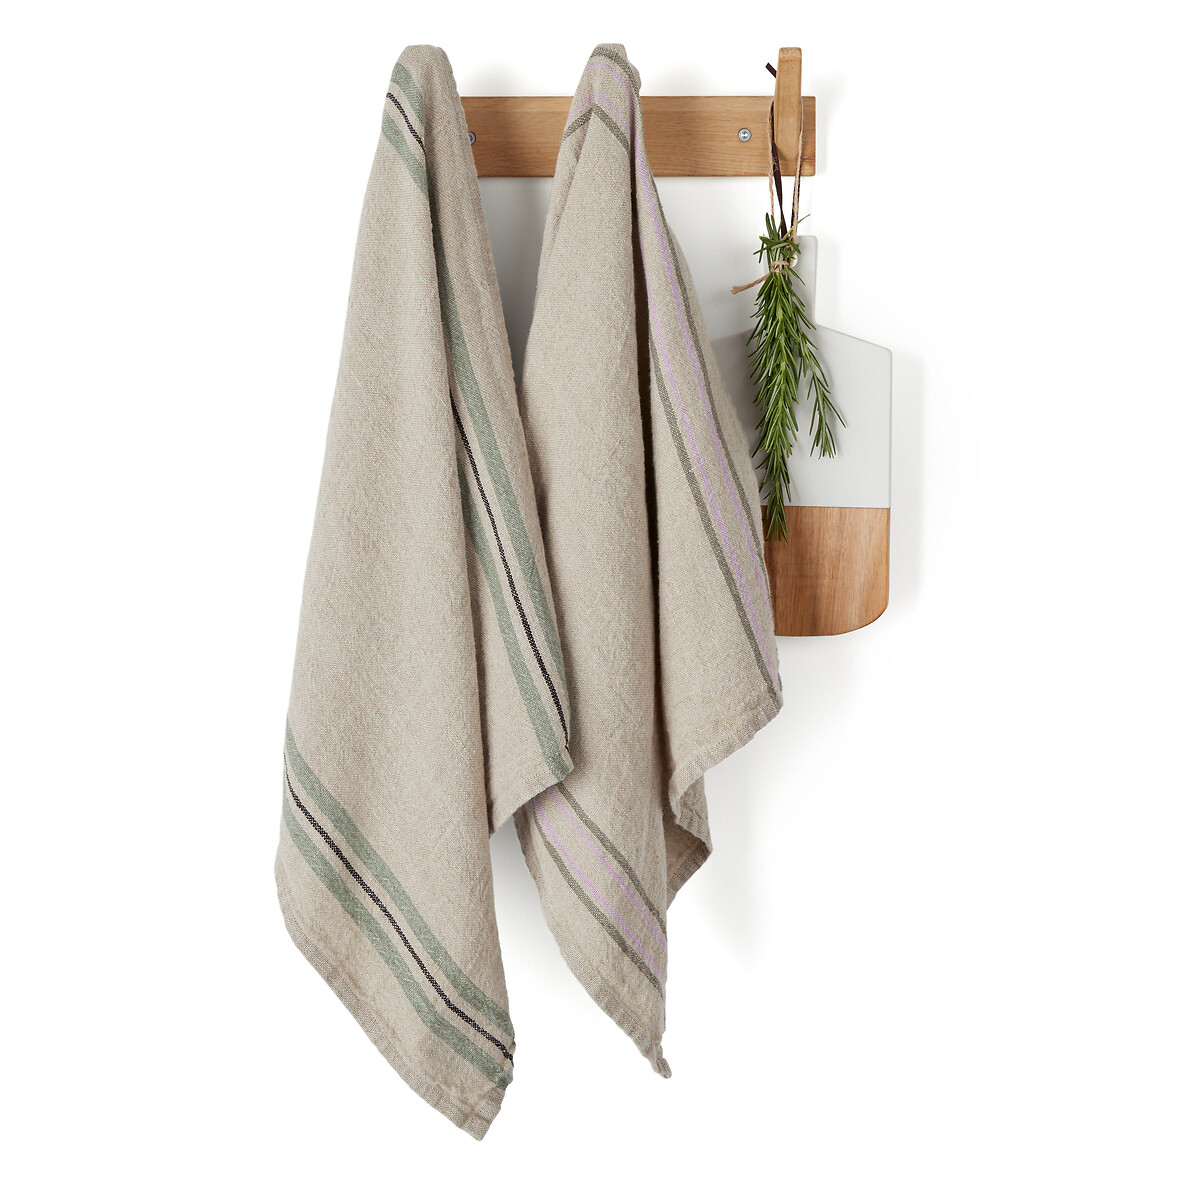 Set of 2 Perrine Thick Woven-Dyed 100% Washed Linen Tea Towels